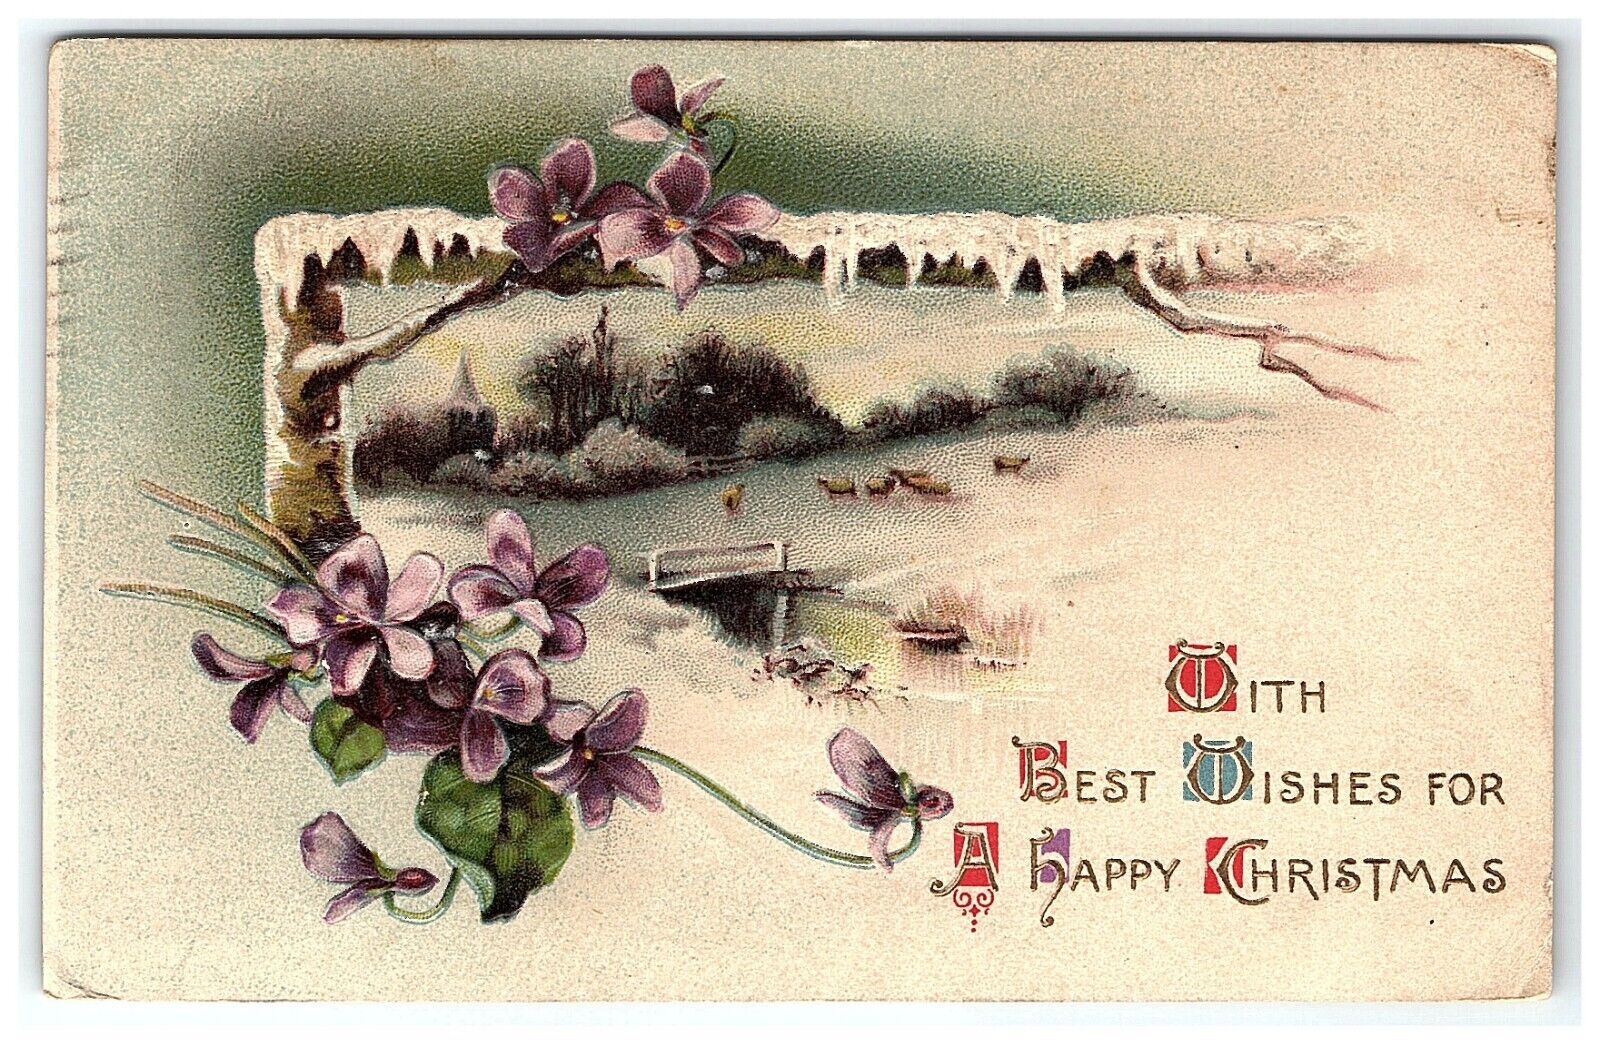 1911 Postcard Best Wishes For A Happy Christmas Embossed Bridge Sheep Flowers